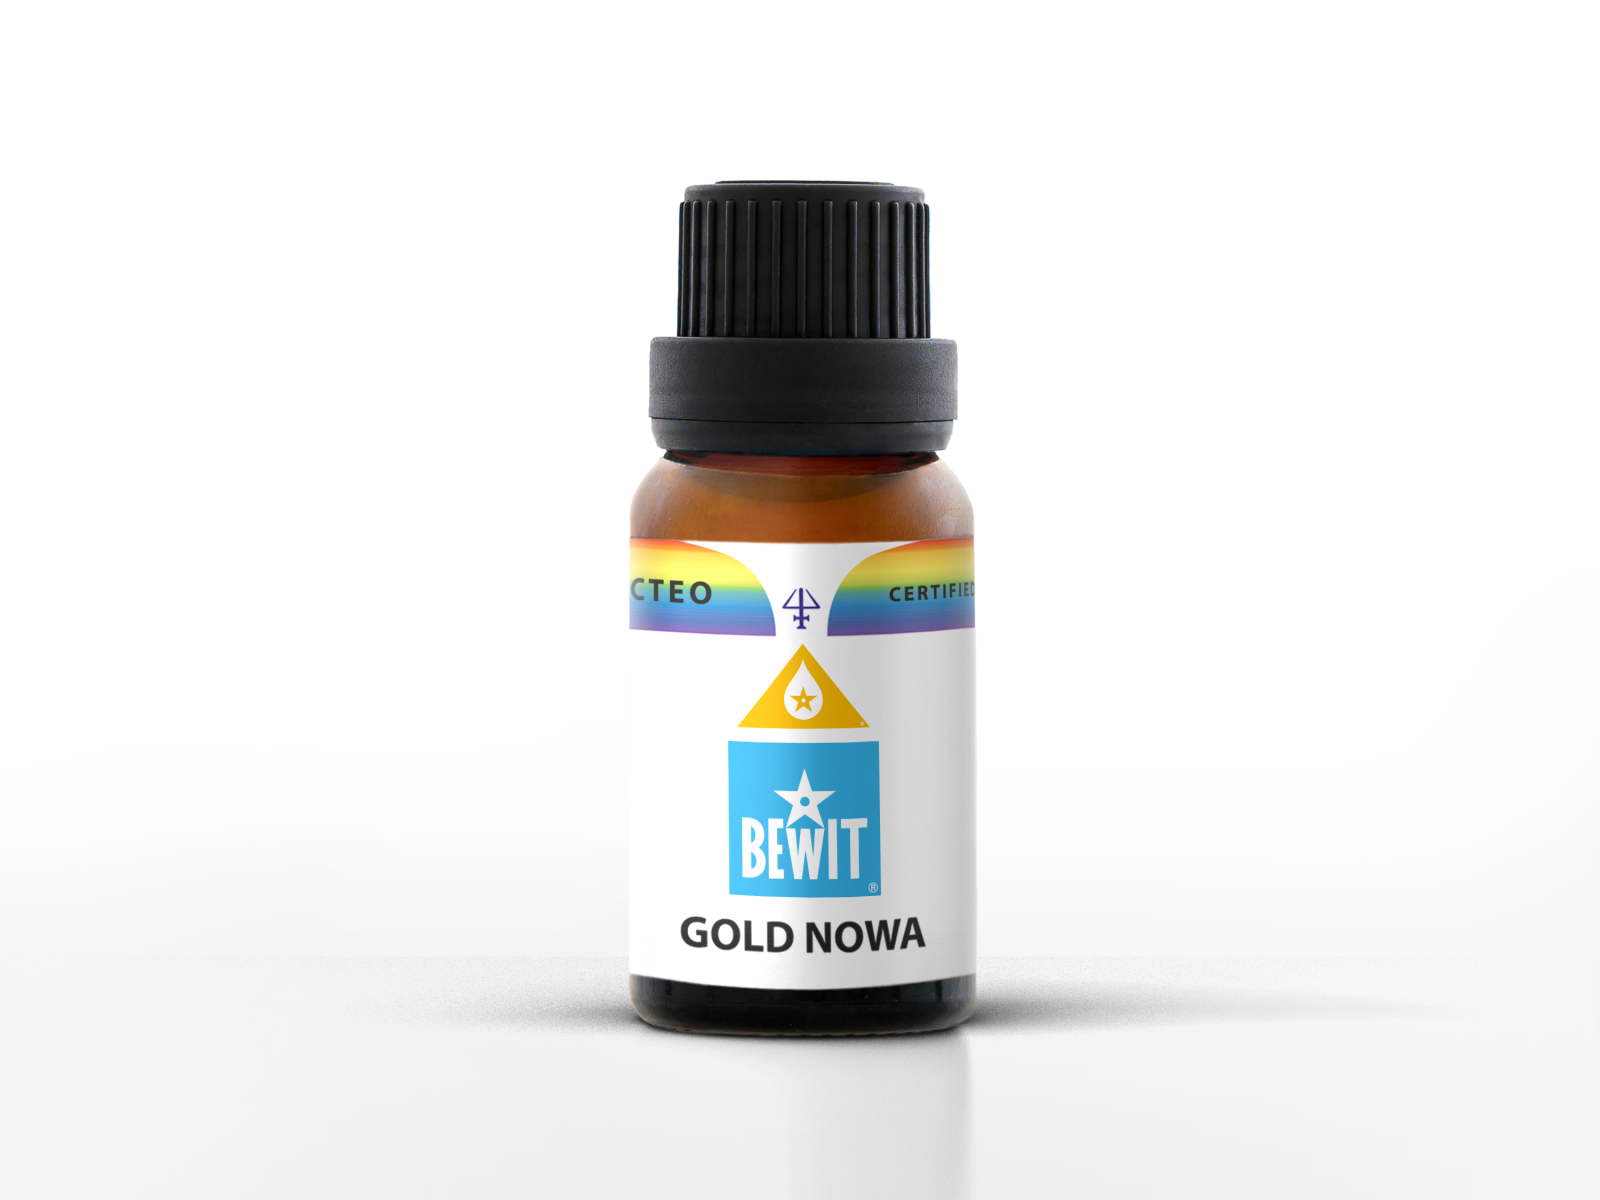 BEWIT GOLD NOWA - Blend of essential oils